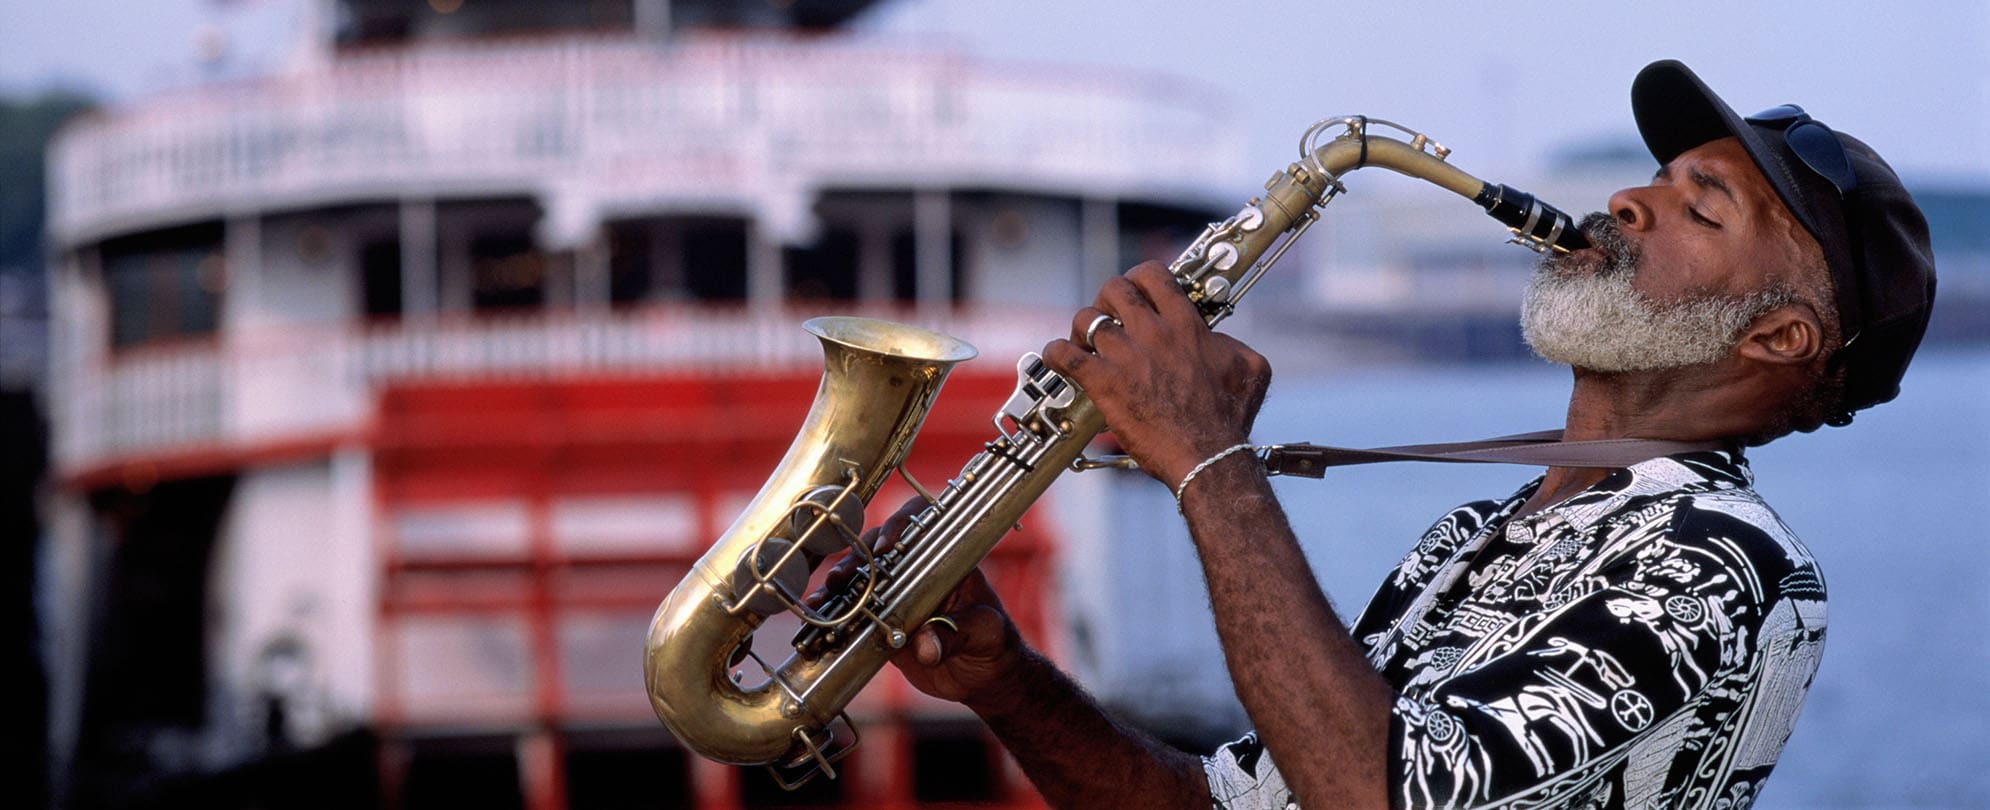 A man plays the saxophone in front of a steamboat cruise in New Orleans, Louisiana